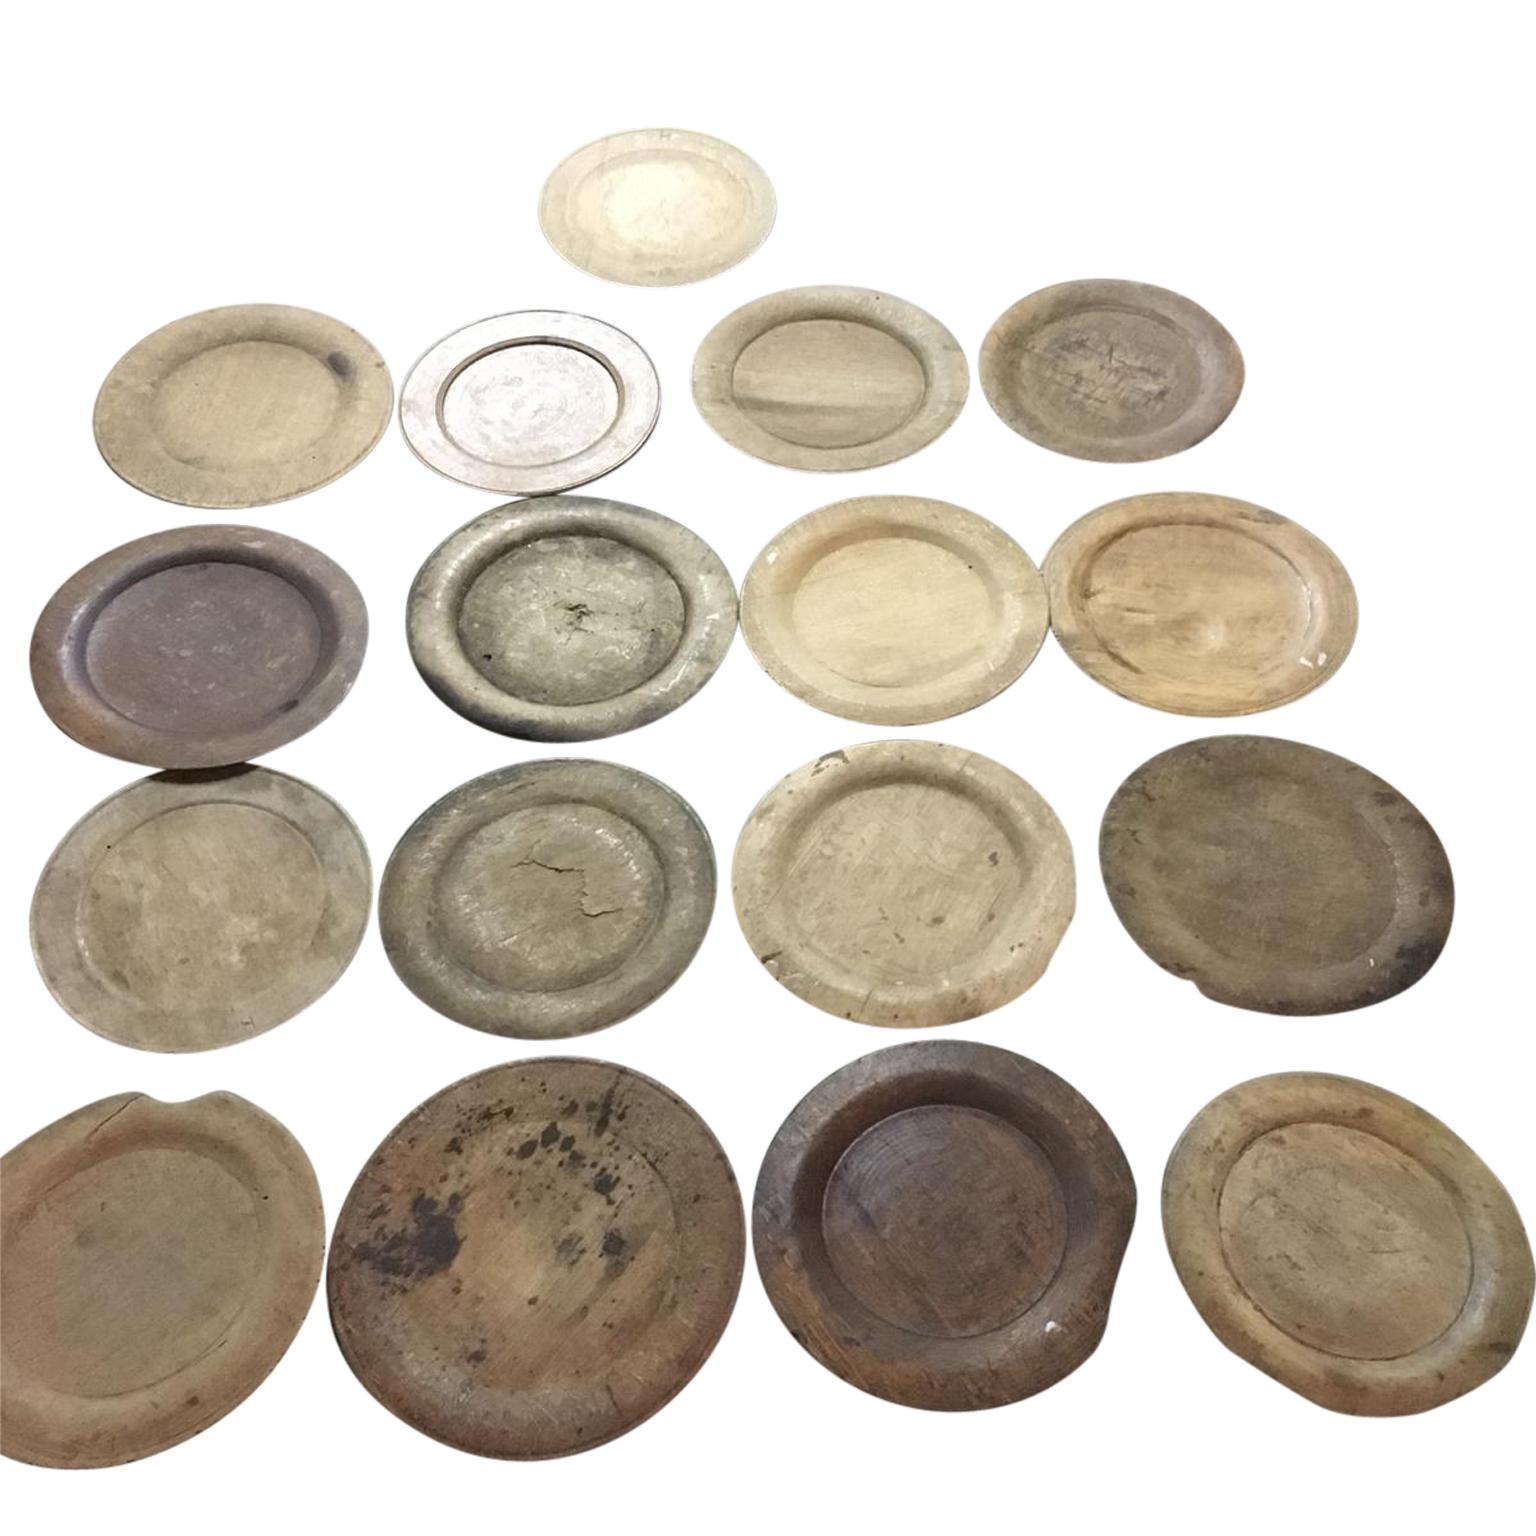 14 rustic Folk Art dinner plates of wood, circa 1780s-1830s available
Could be used for trays, serveware or under-plates.

Pricing is per item.

Diameter of the plates range from 17cm to 19cm (between 6.7 inches and 7.5 inches), most of the plates